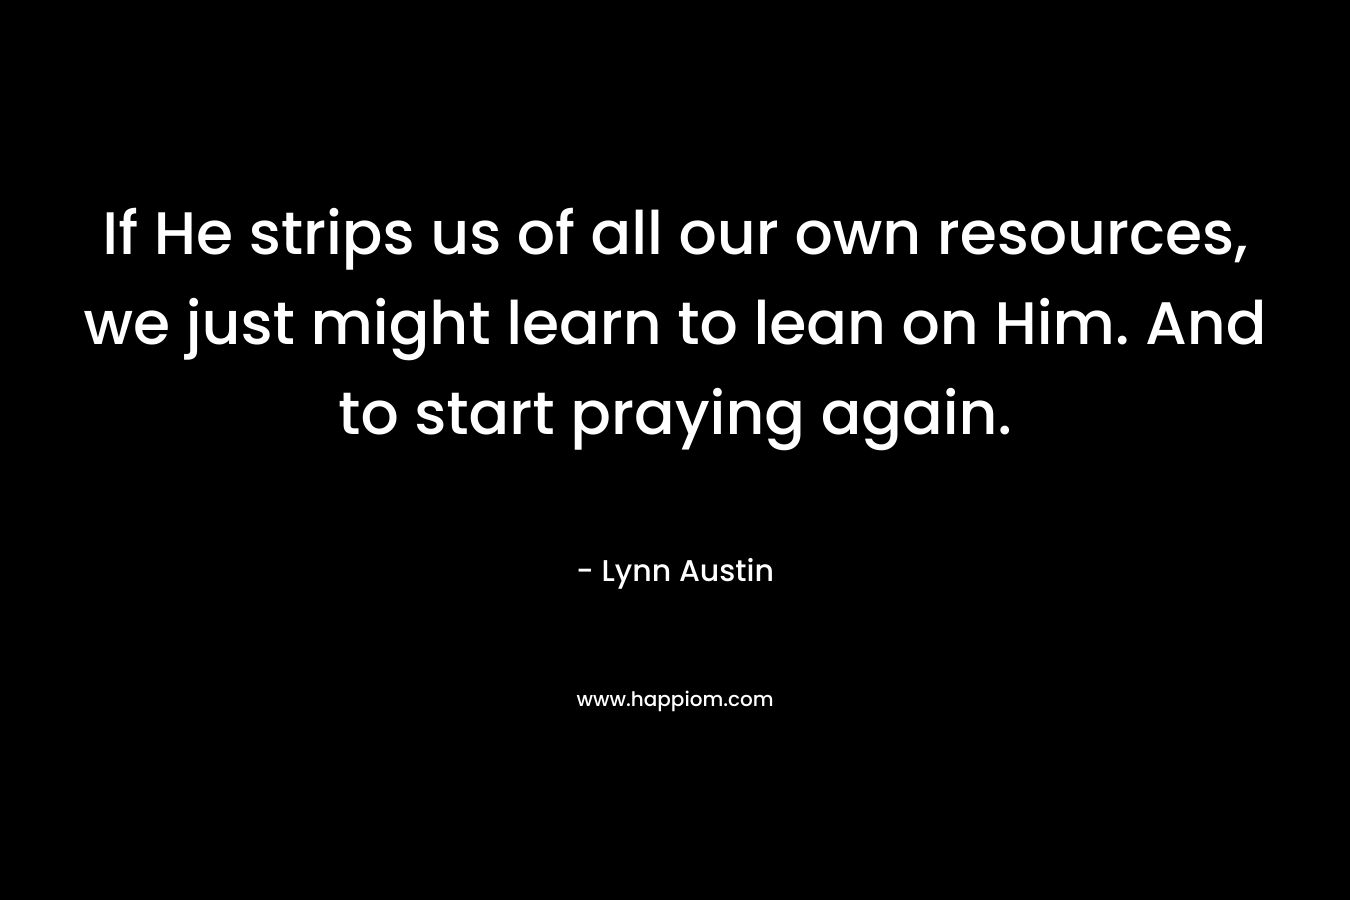 If He strips us of all our own resources, we just might learn to lean on Him. And to start praying again. – Lynn Austin